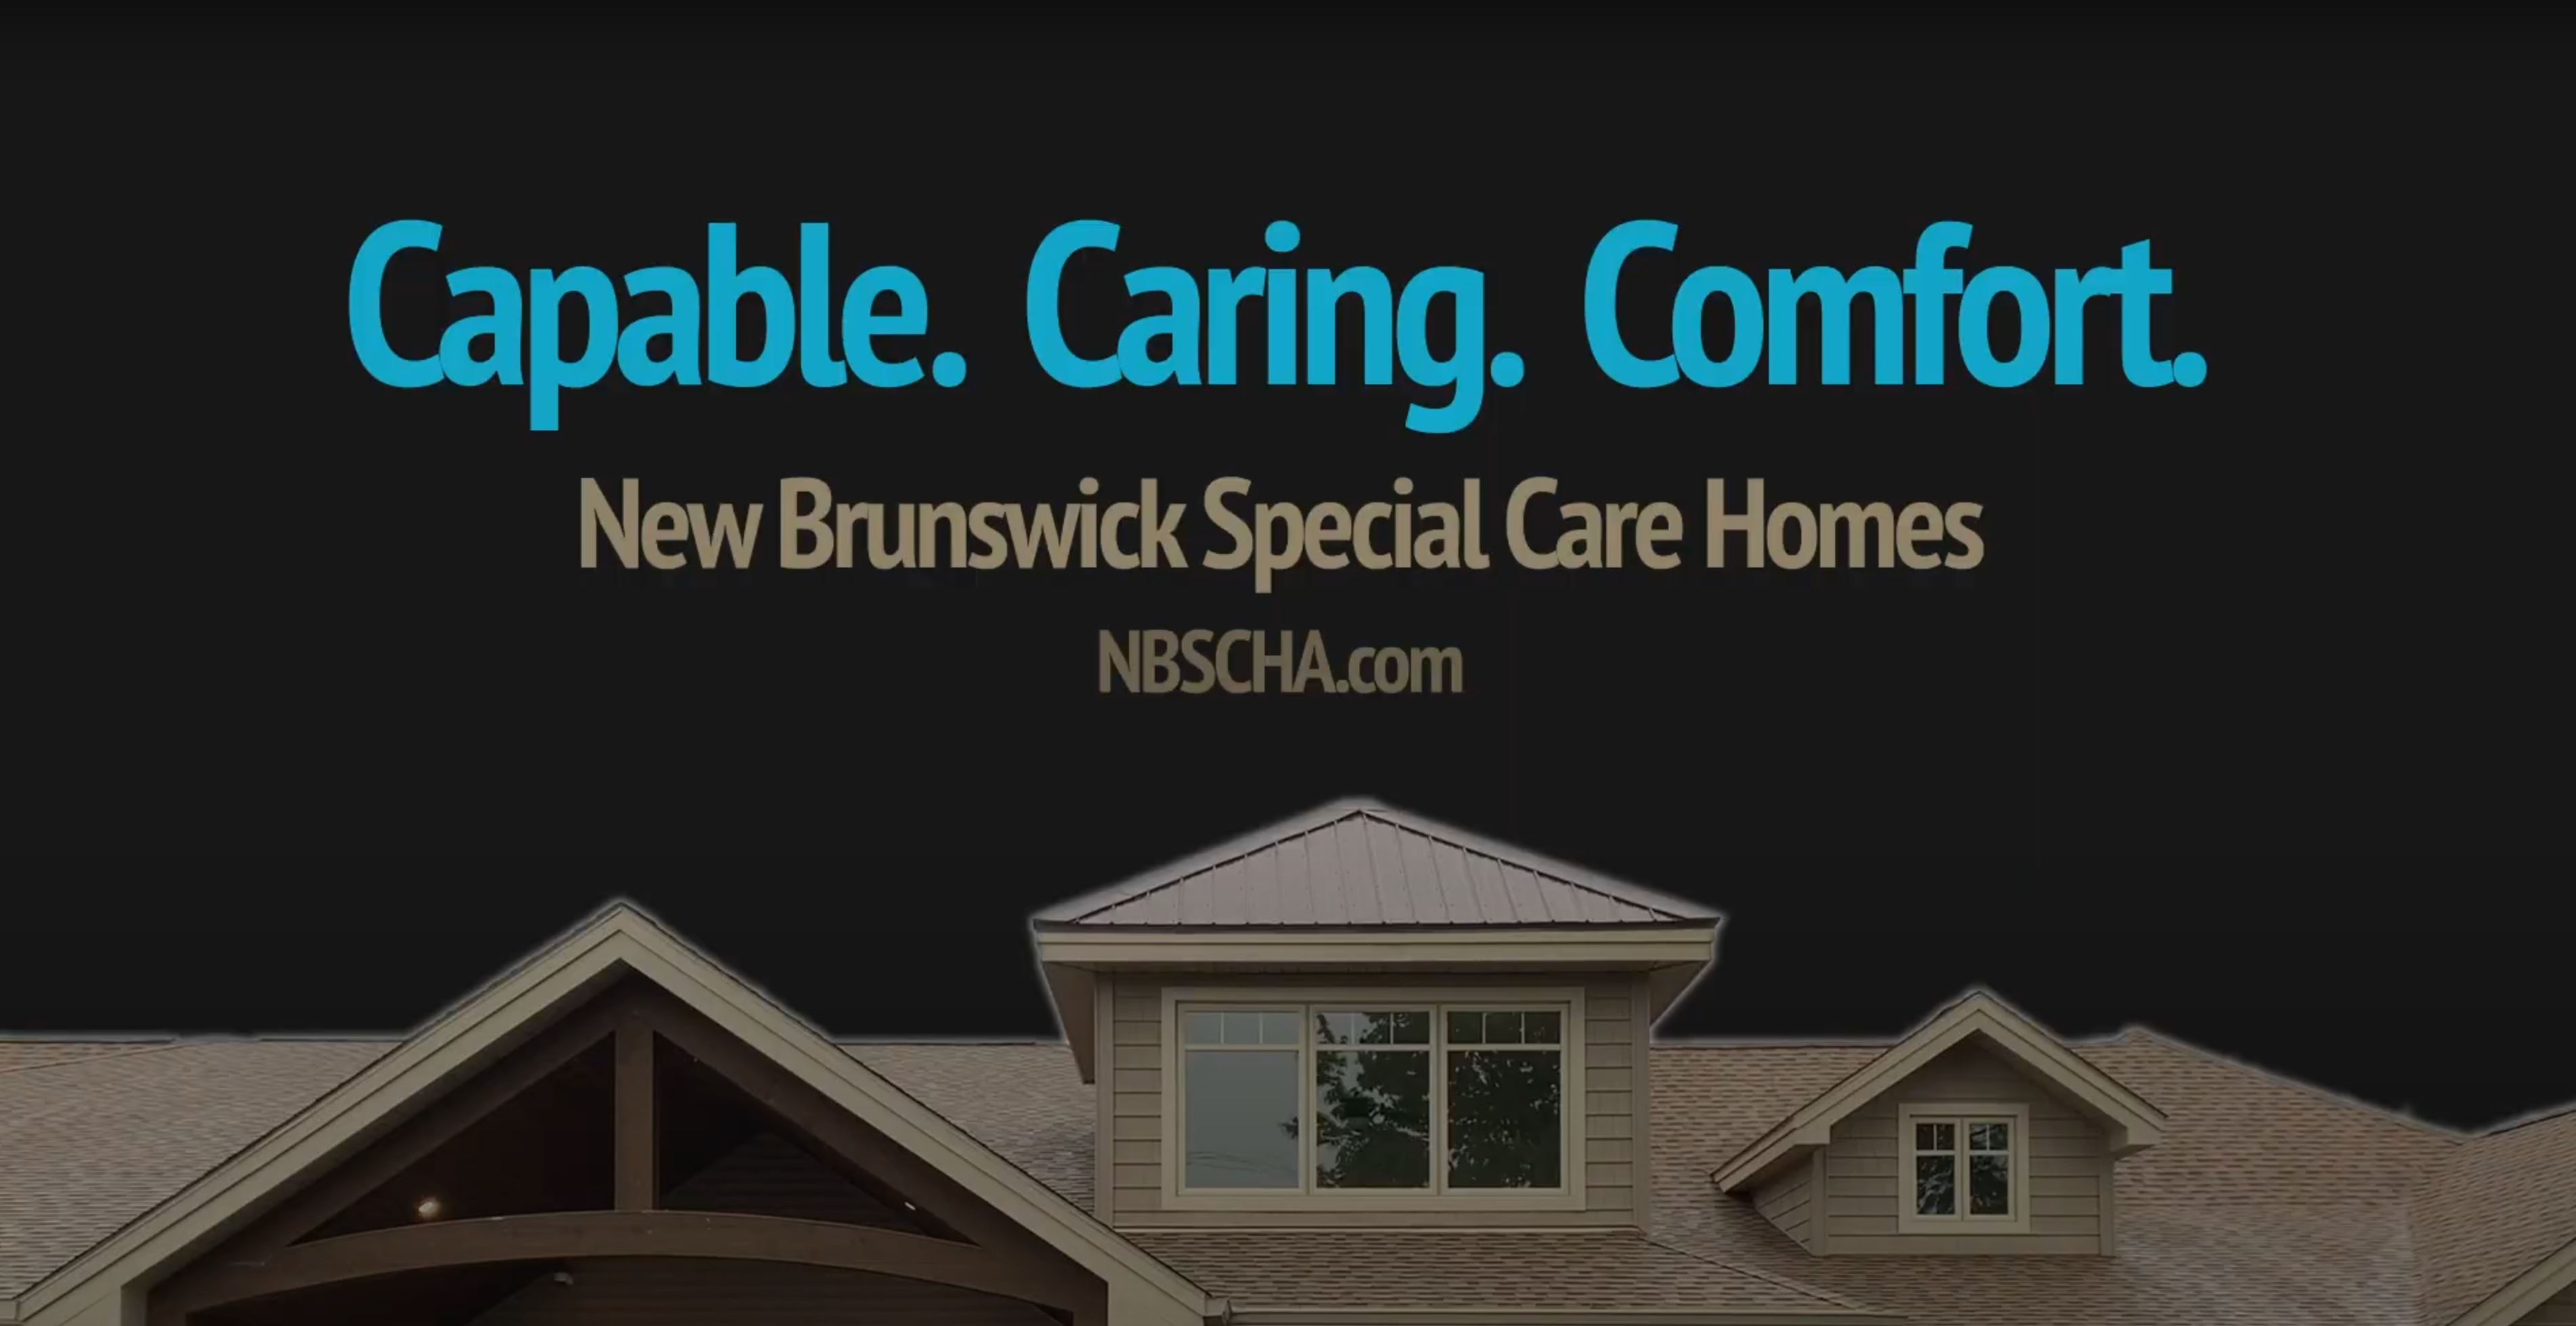 NBSCHA Affordable. Quality. Now.